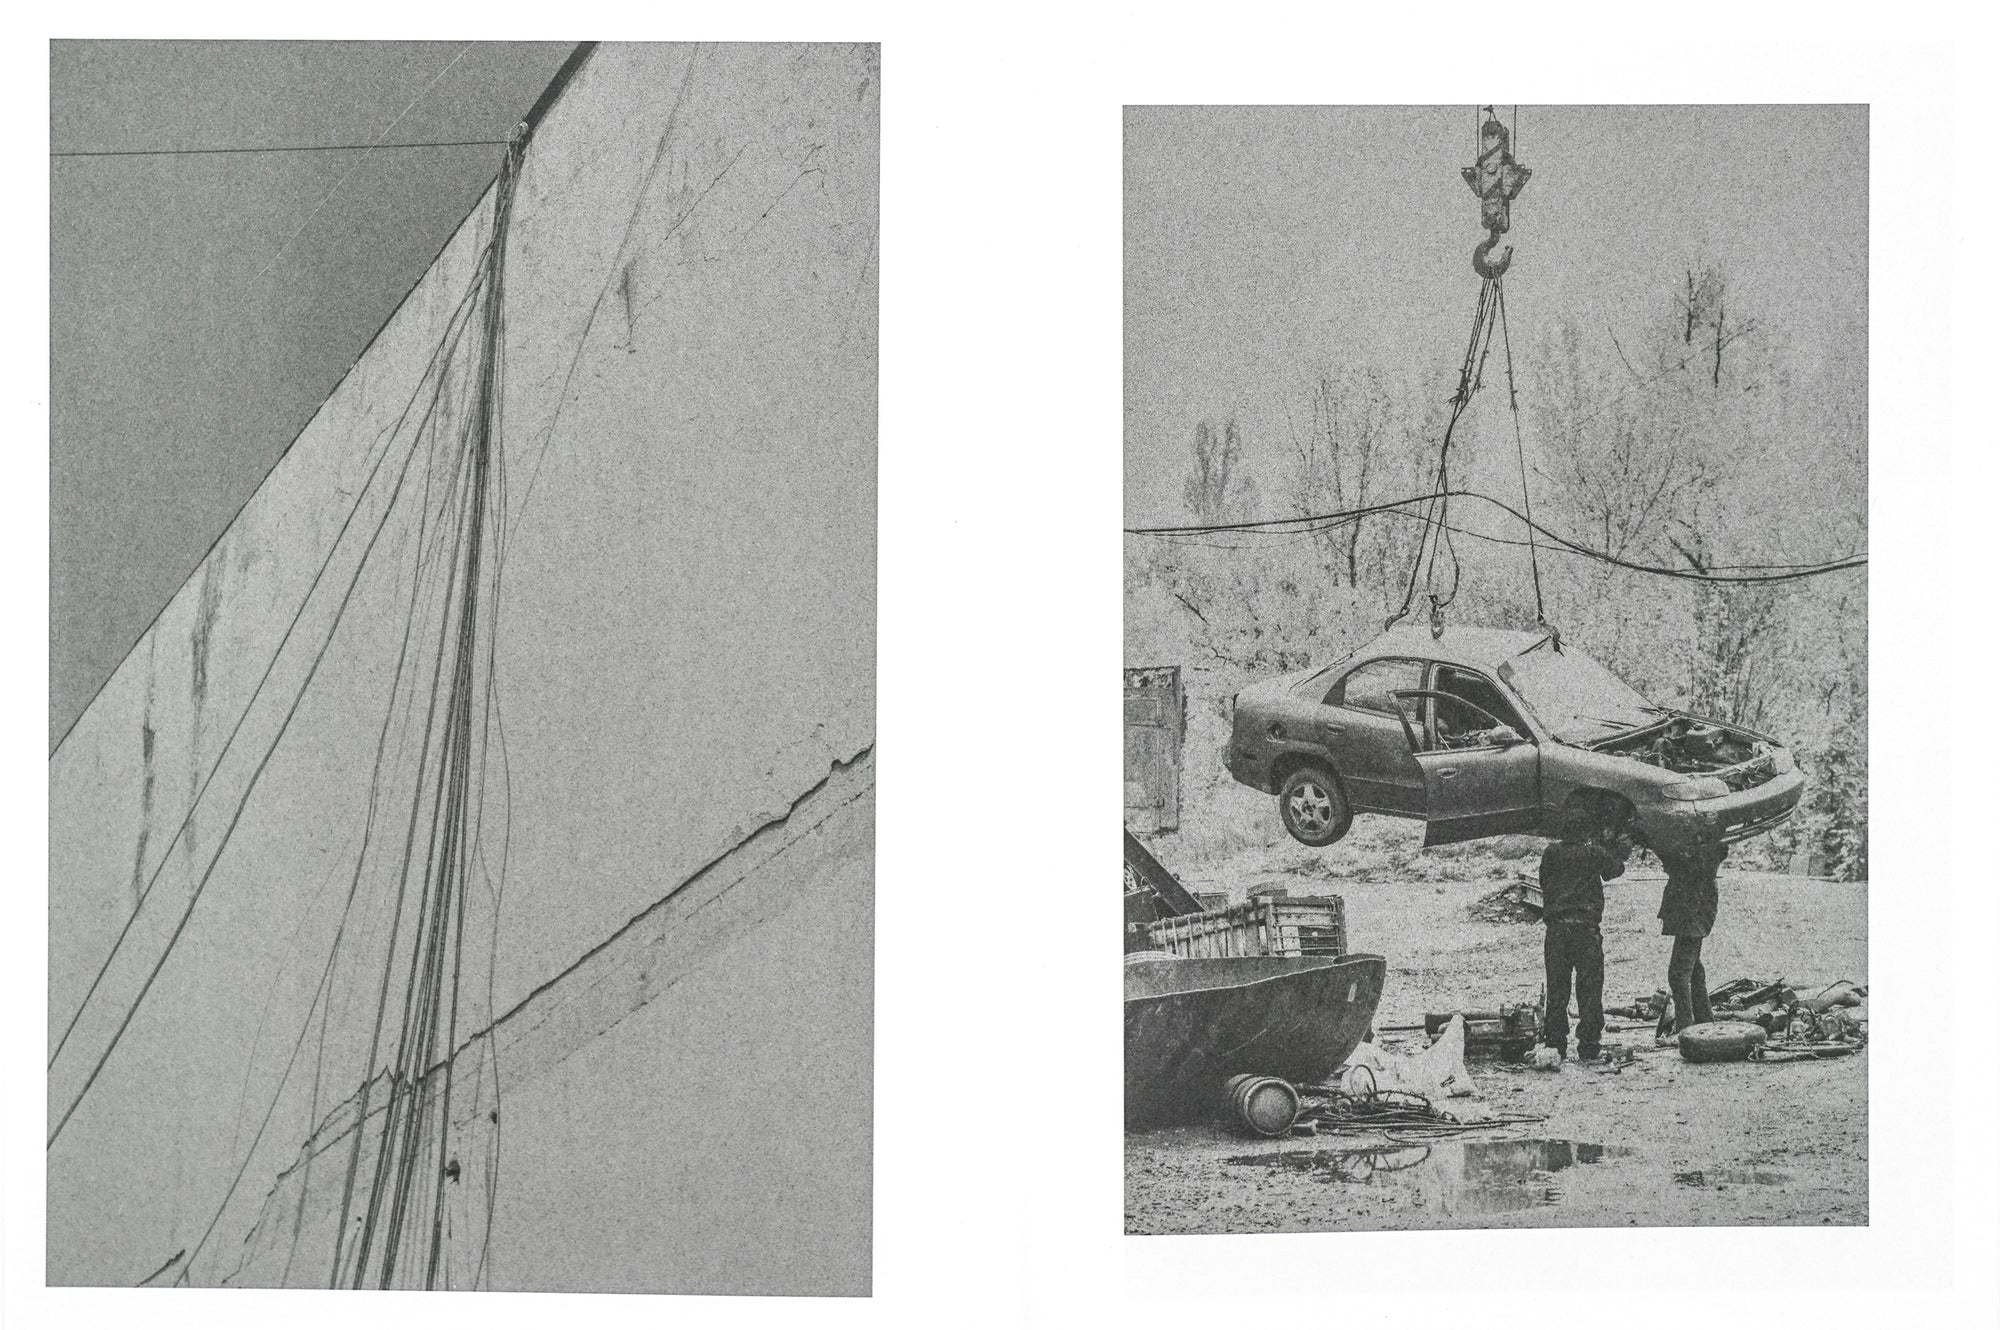 A spread showing two low-contrast black and white photographs, to the left one of wires hanging down a concrete wall and to the right a car held up by a crane with two people standing close by. 